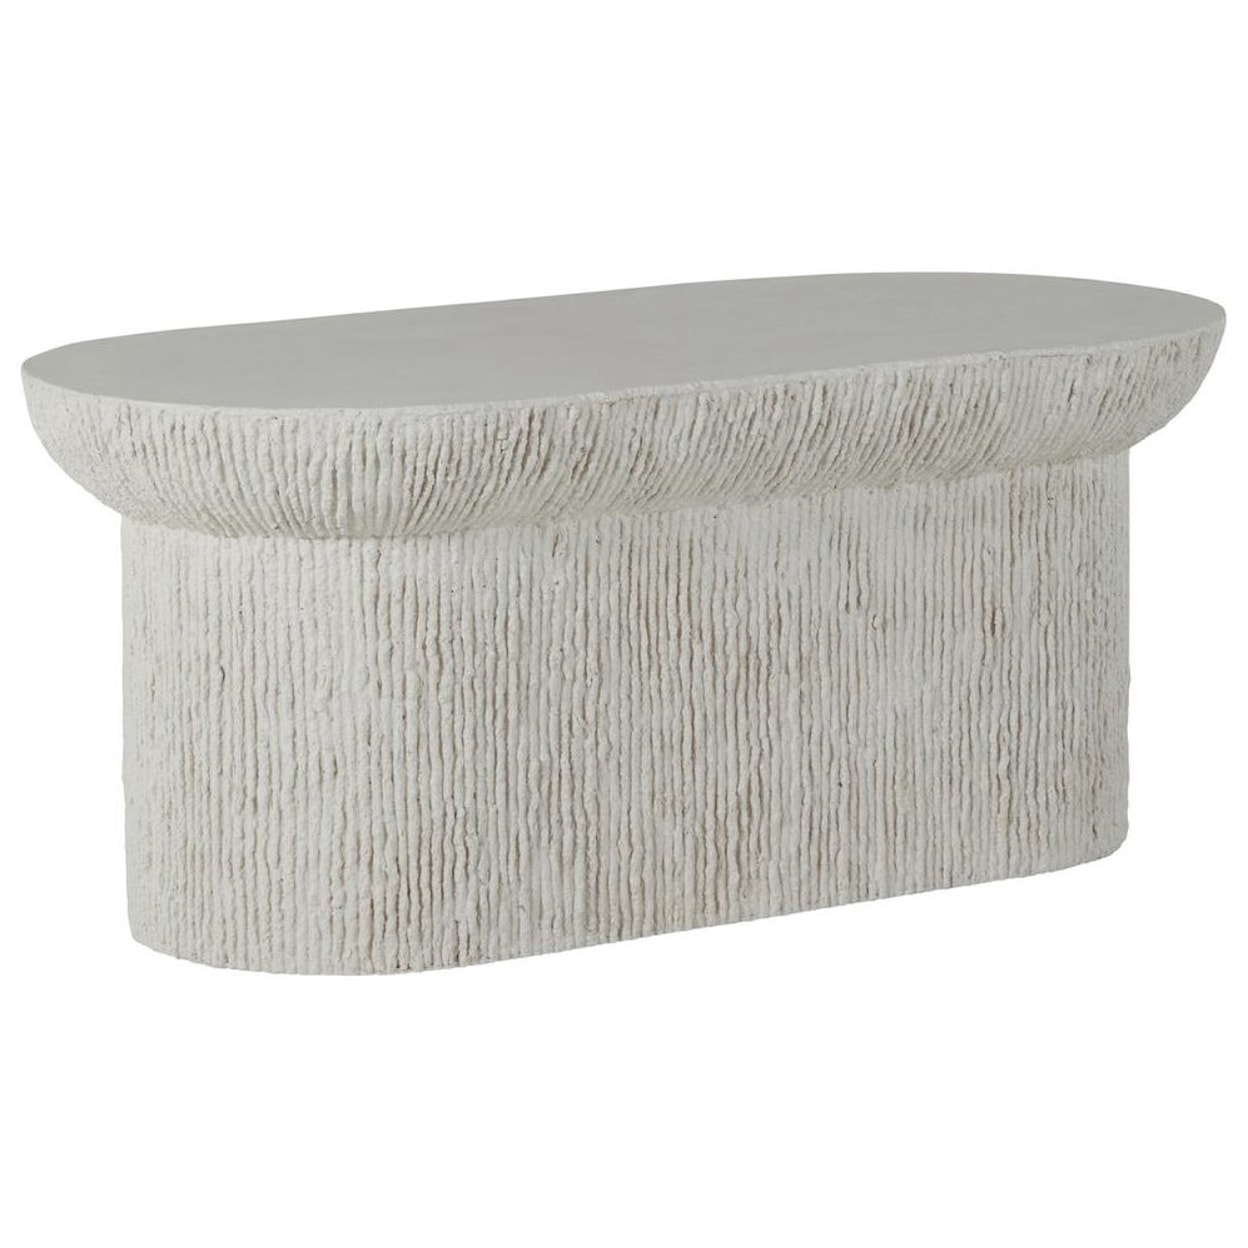 Summer Classics Stonecast Brant Oval Coffee Table